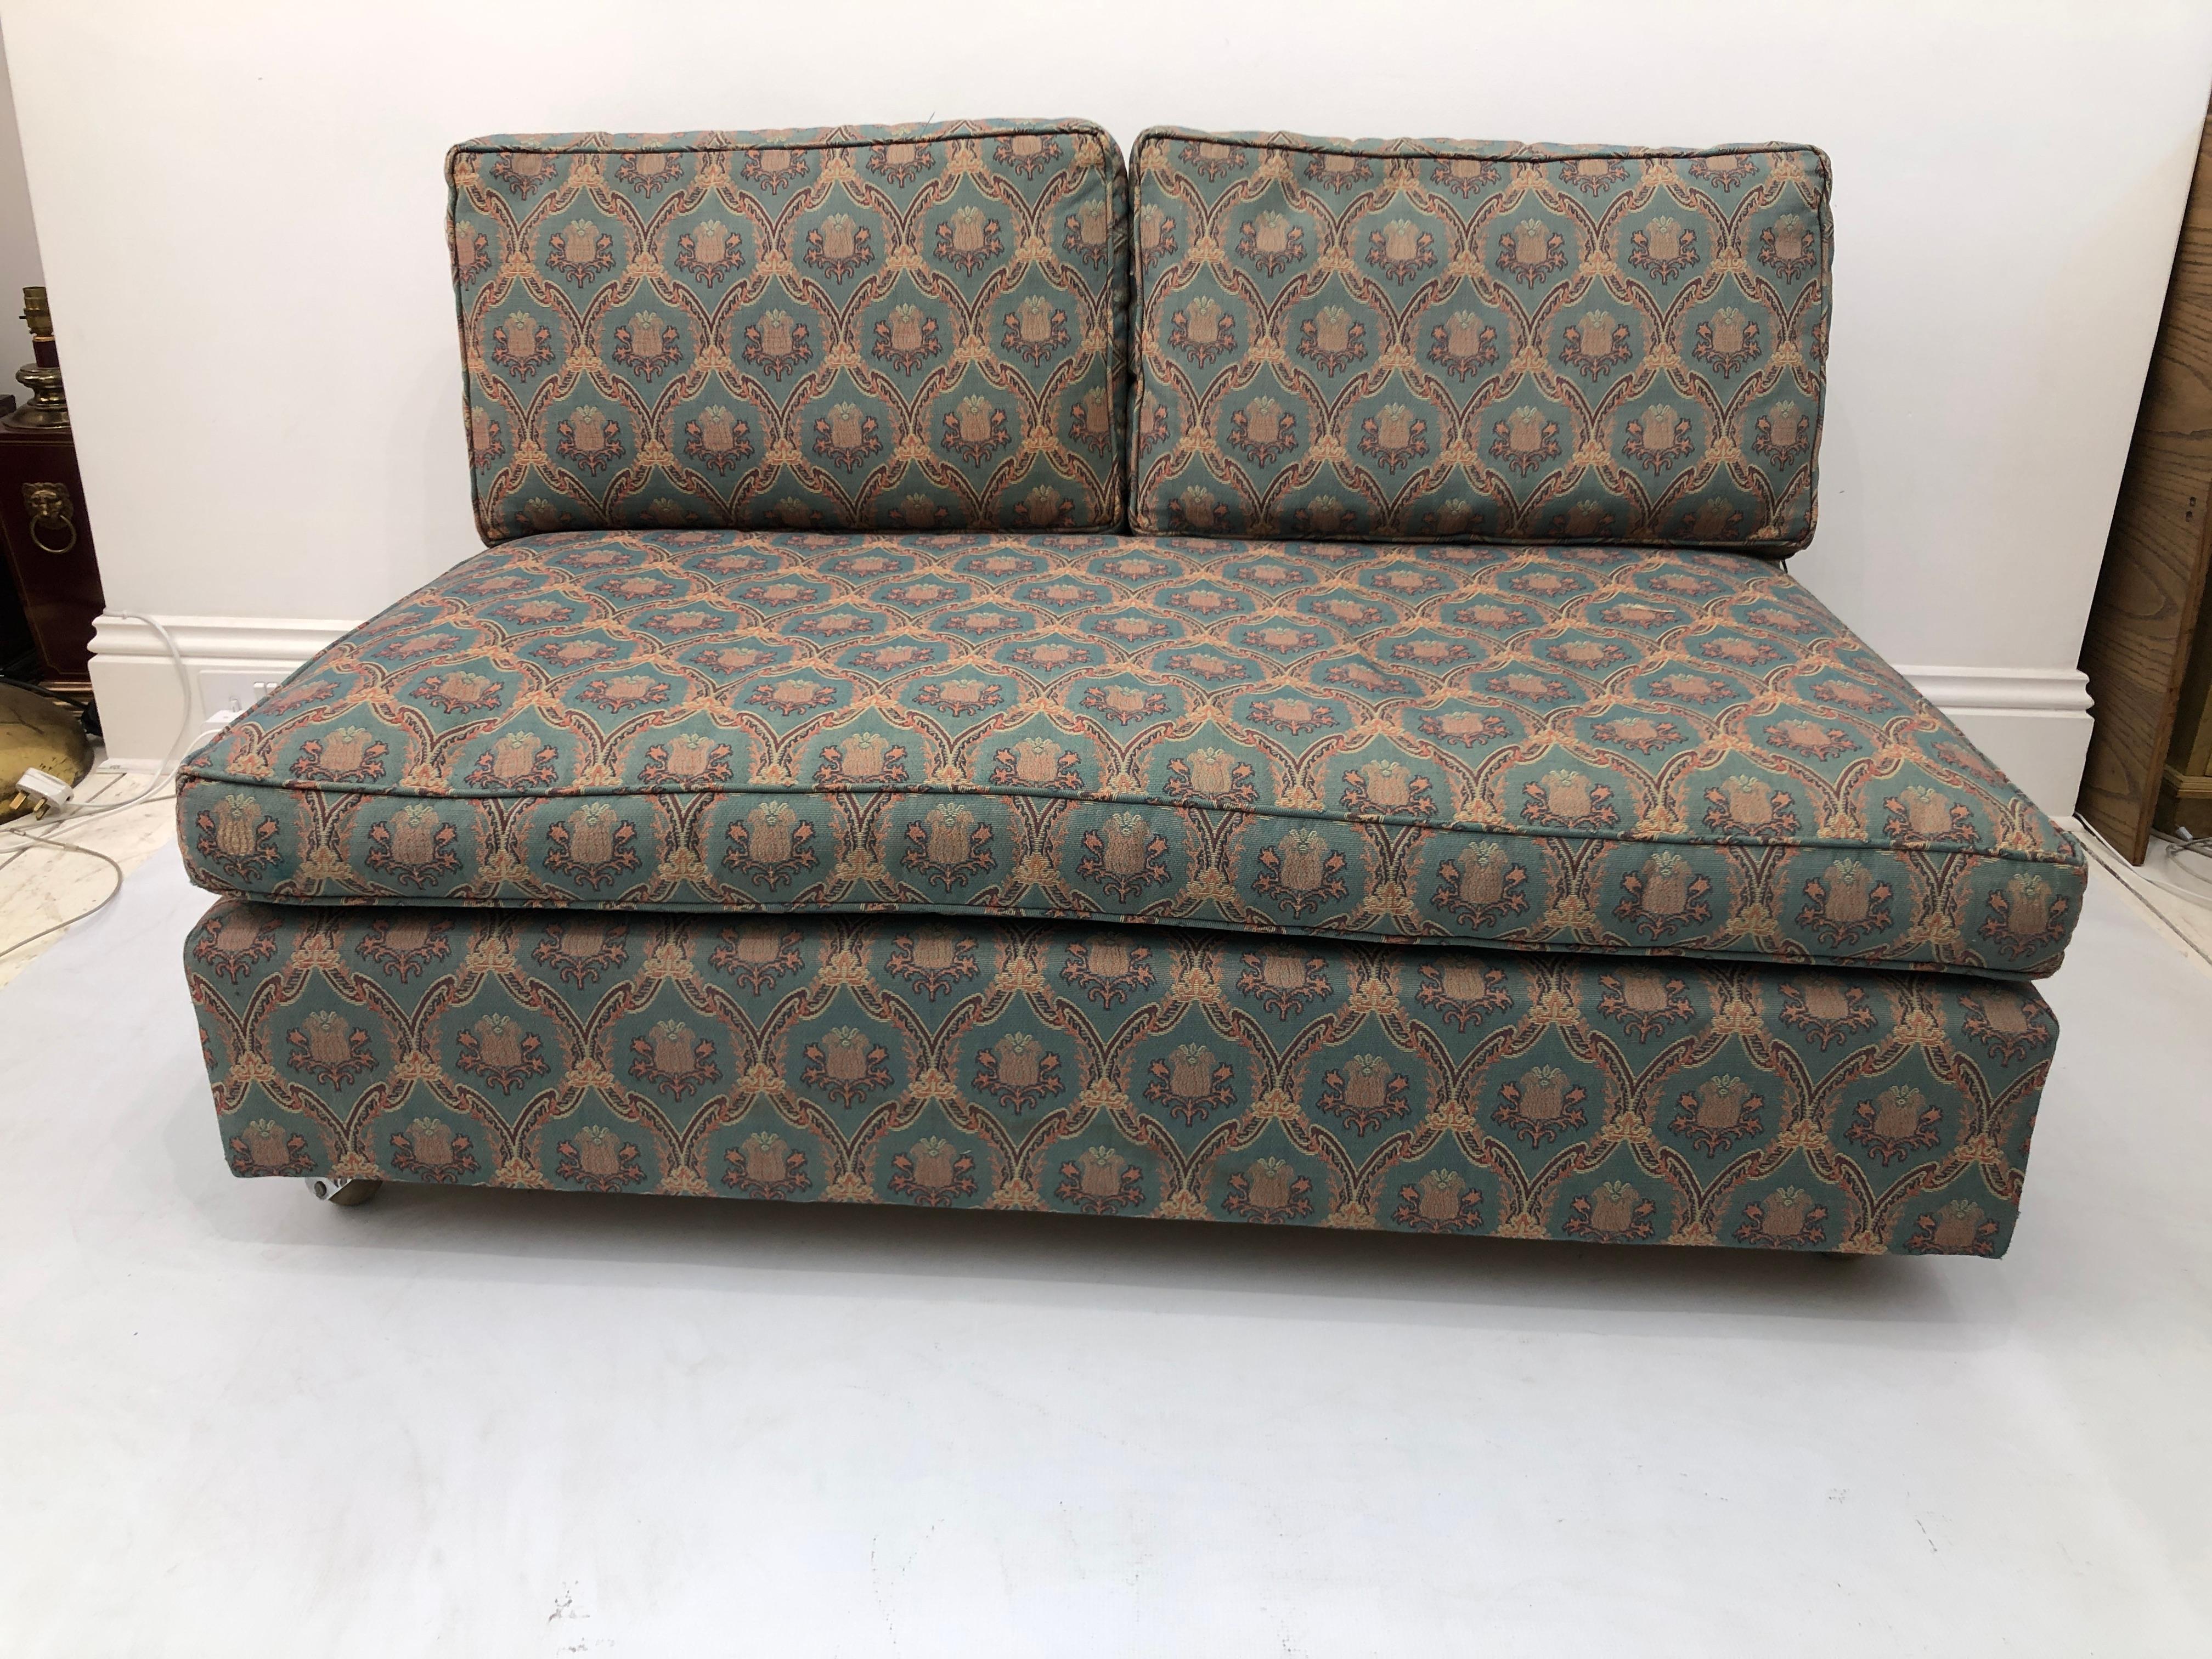 Simple minimalist 1960s Mid Century Modern two-seater armless sofa. 
It would benefit new upholstery, eventually you could add arms too if you wish.

an easy design that would look great in many interiors and rooms.

Easy, comfortable design and